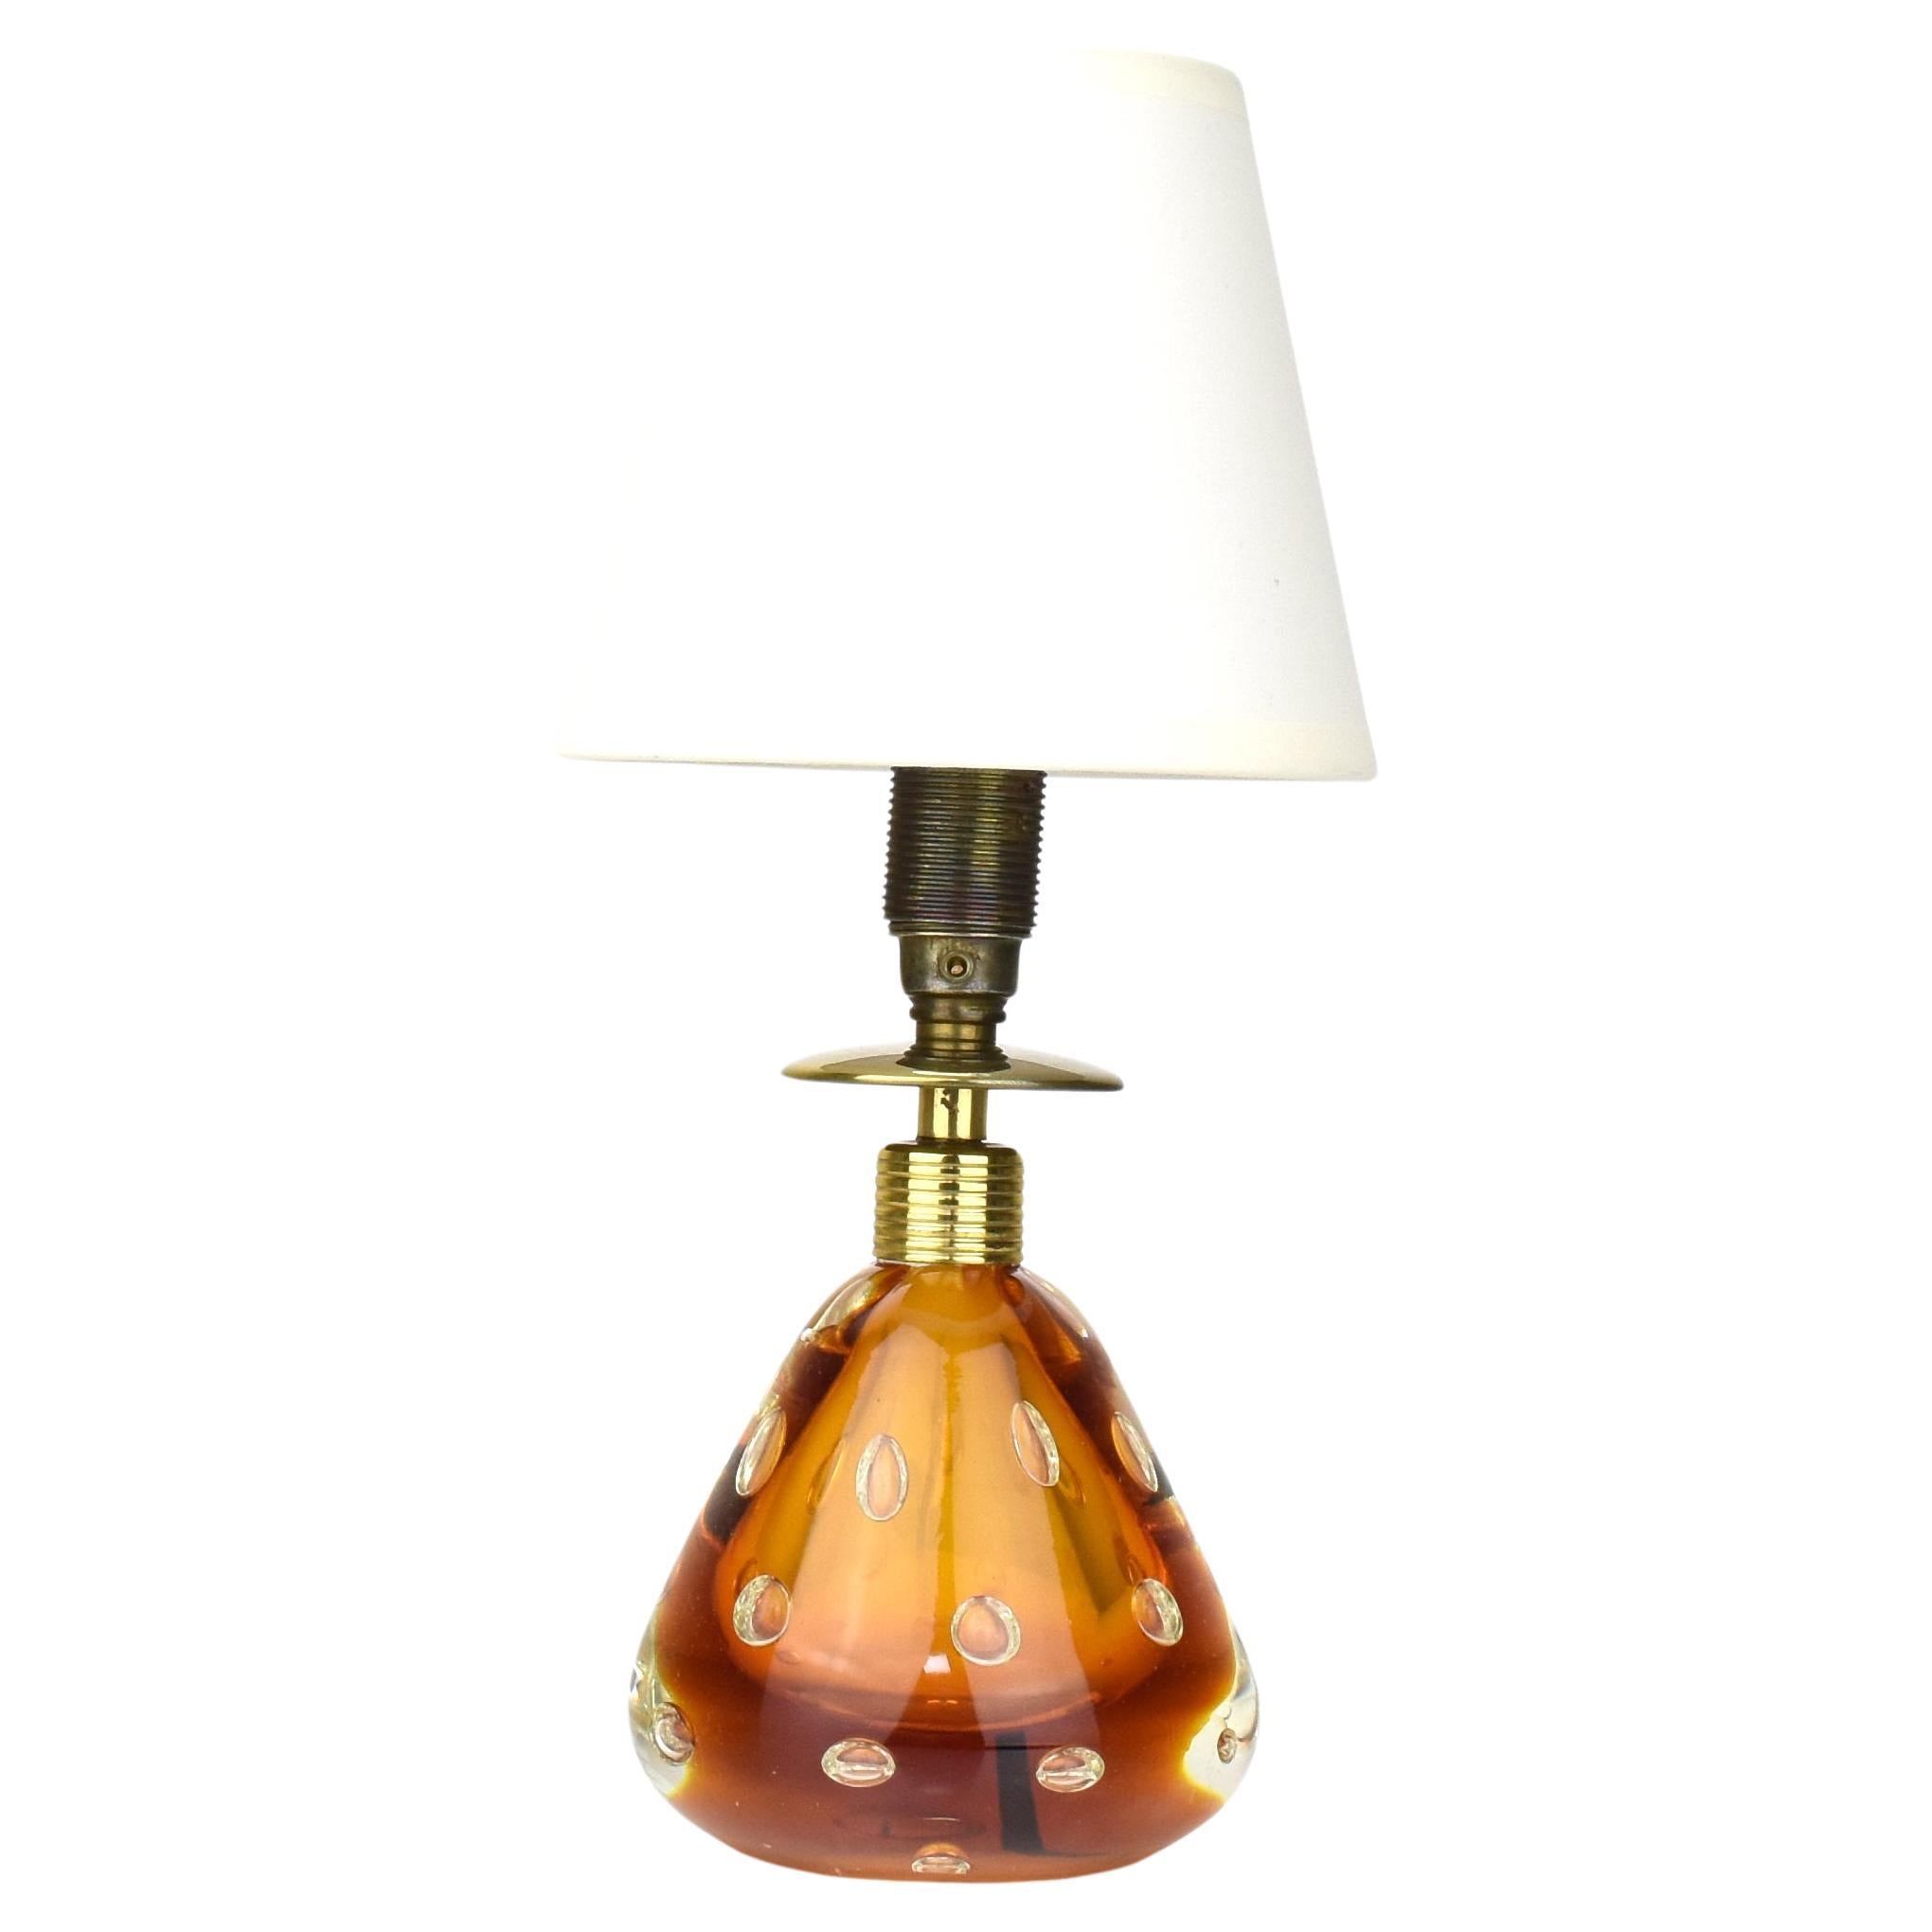 Pietro Toso for Fratelli Toso Murano Sommerso Amber Art Glass Table Lamp 1950s For Sale